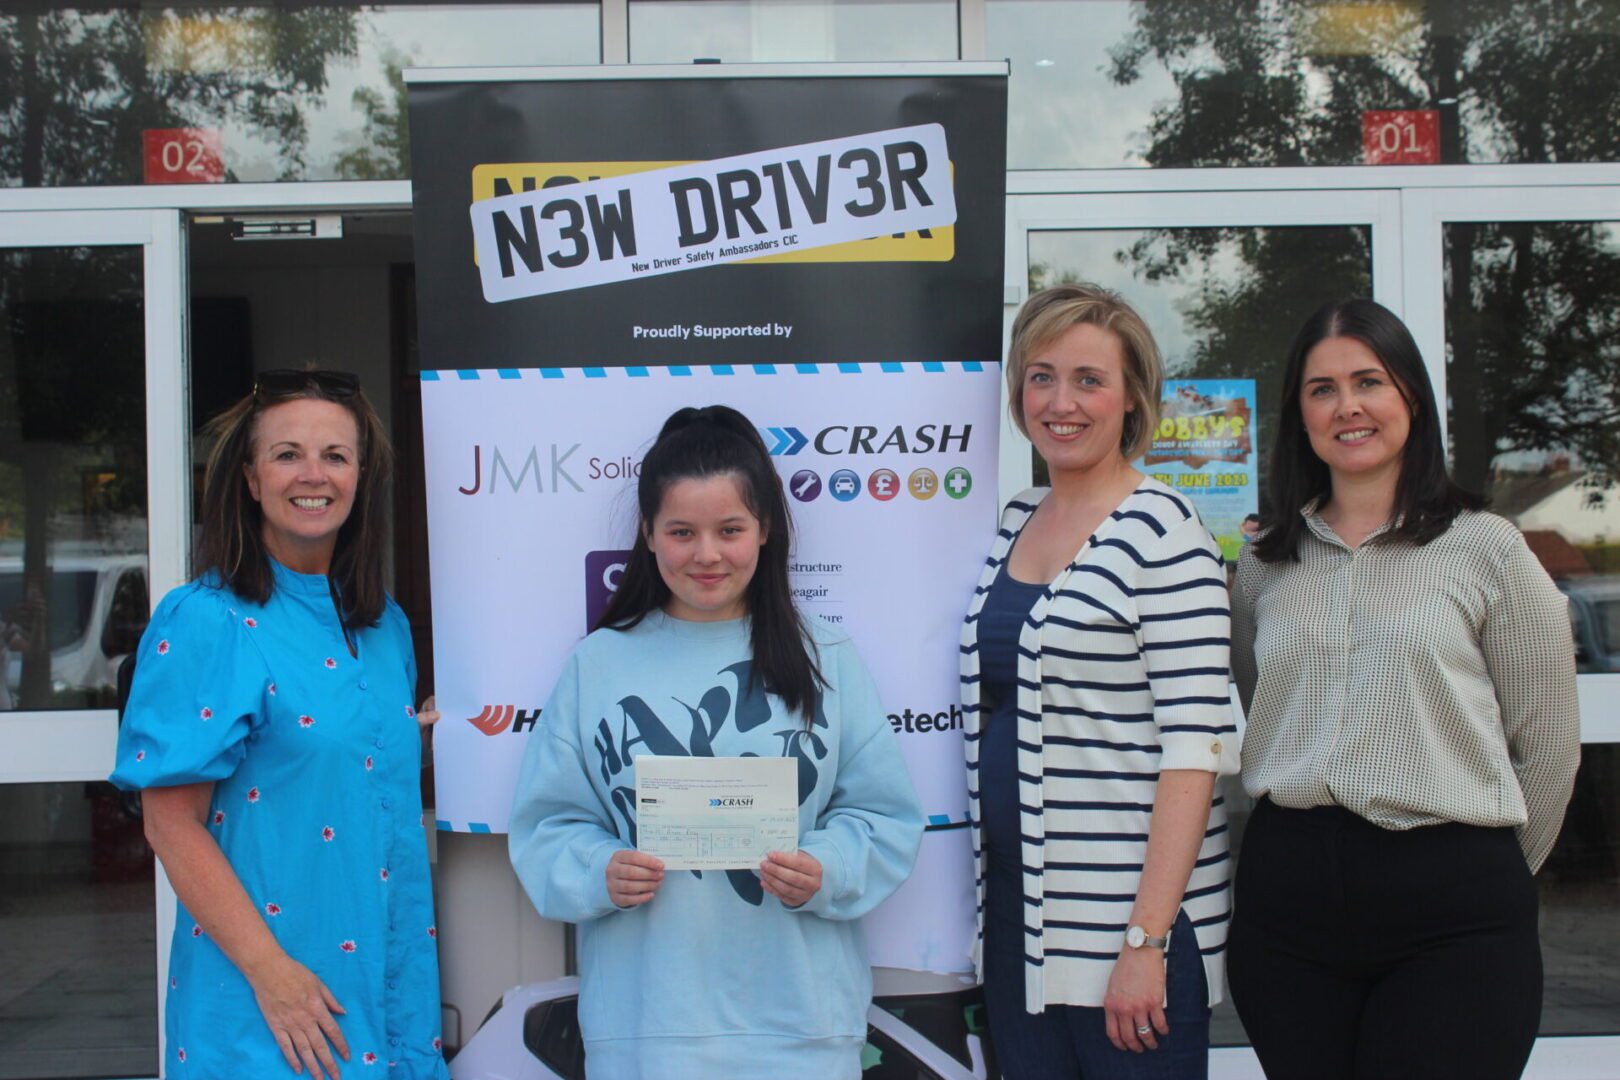 New Driver NI give school £1000 prize competition winner